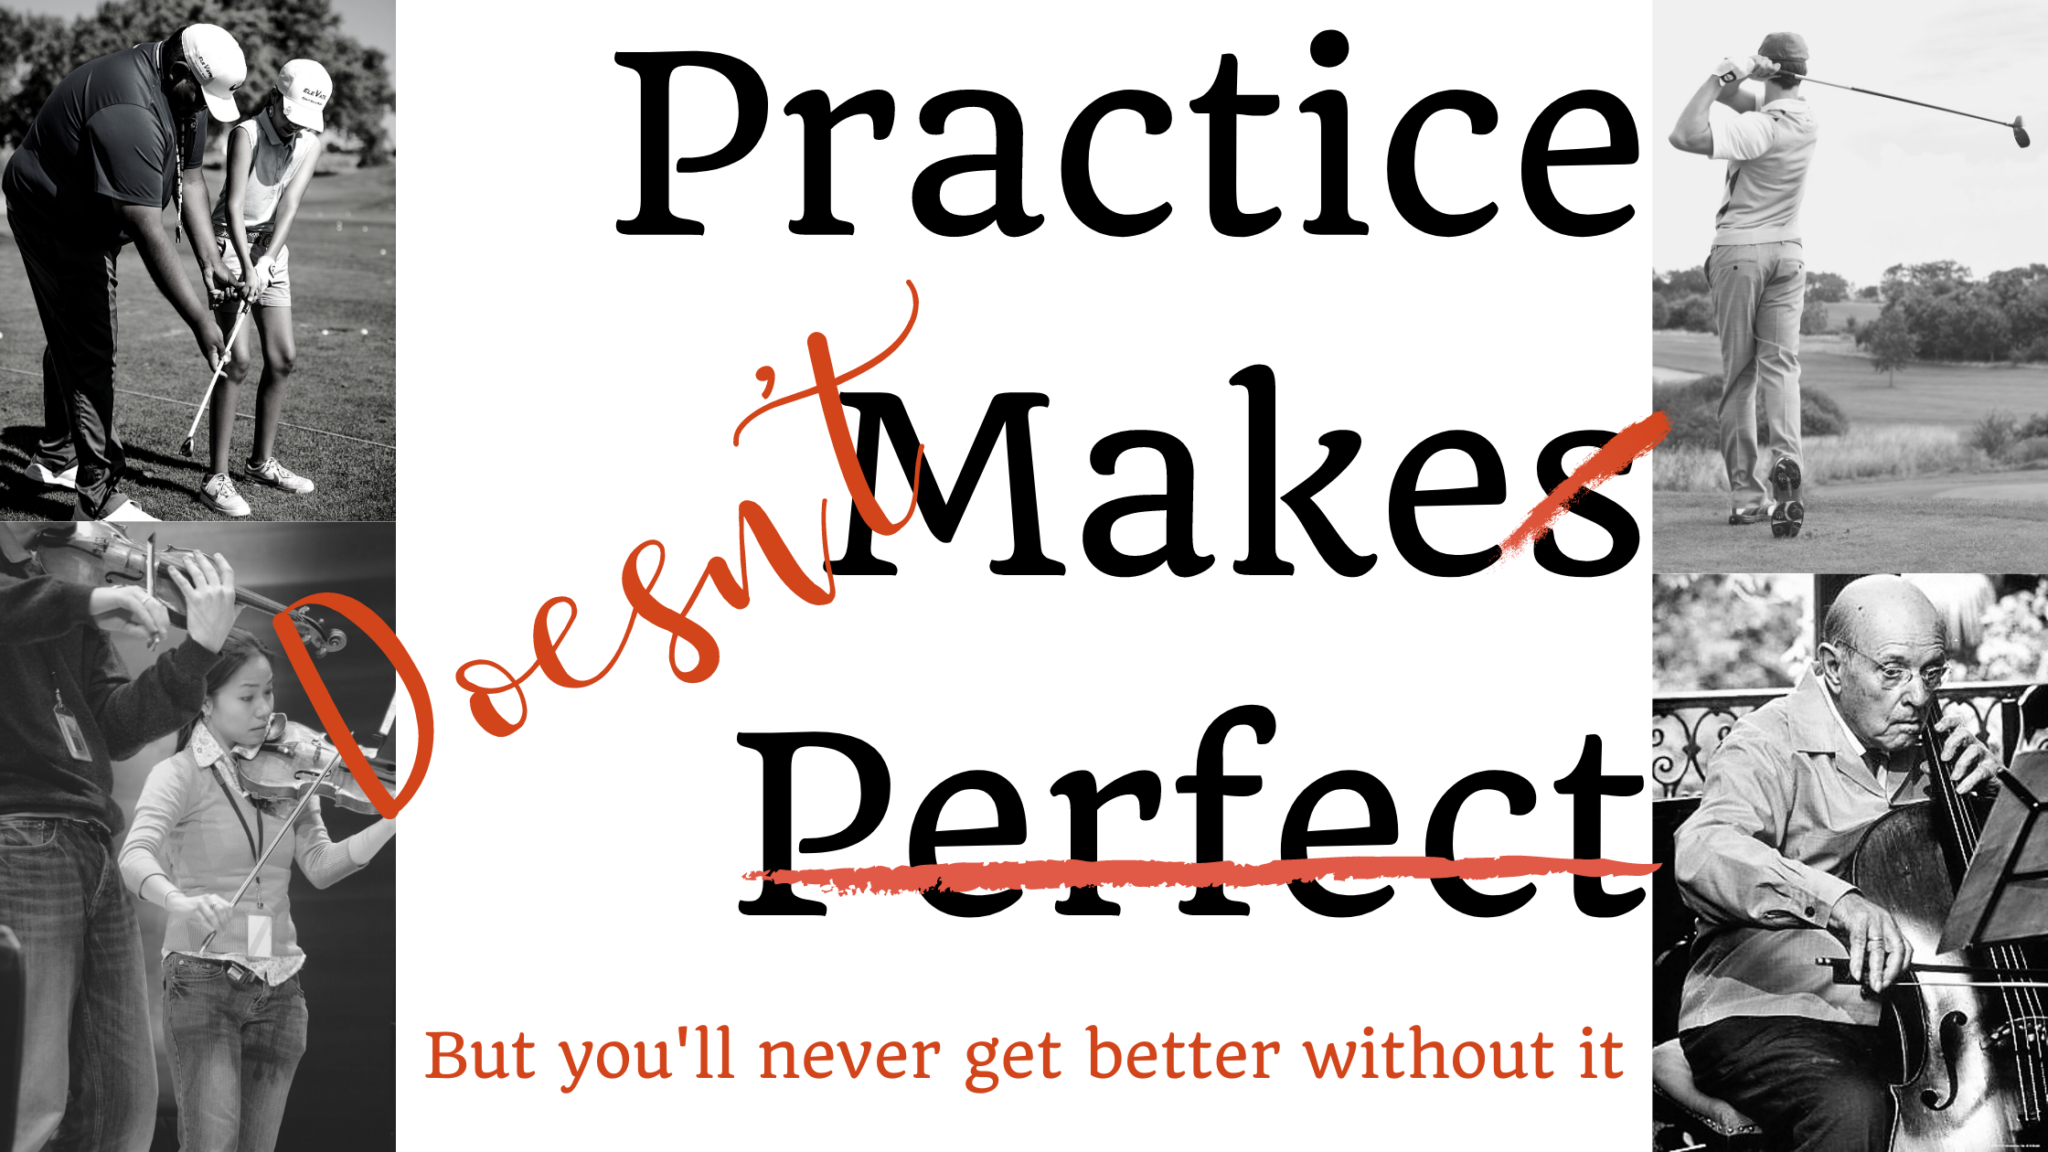 Practice doesn't make perfect